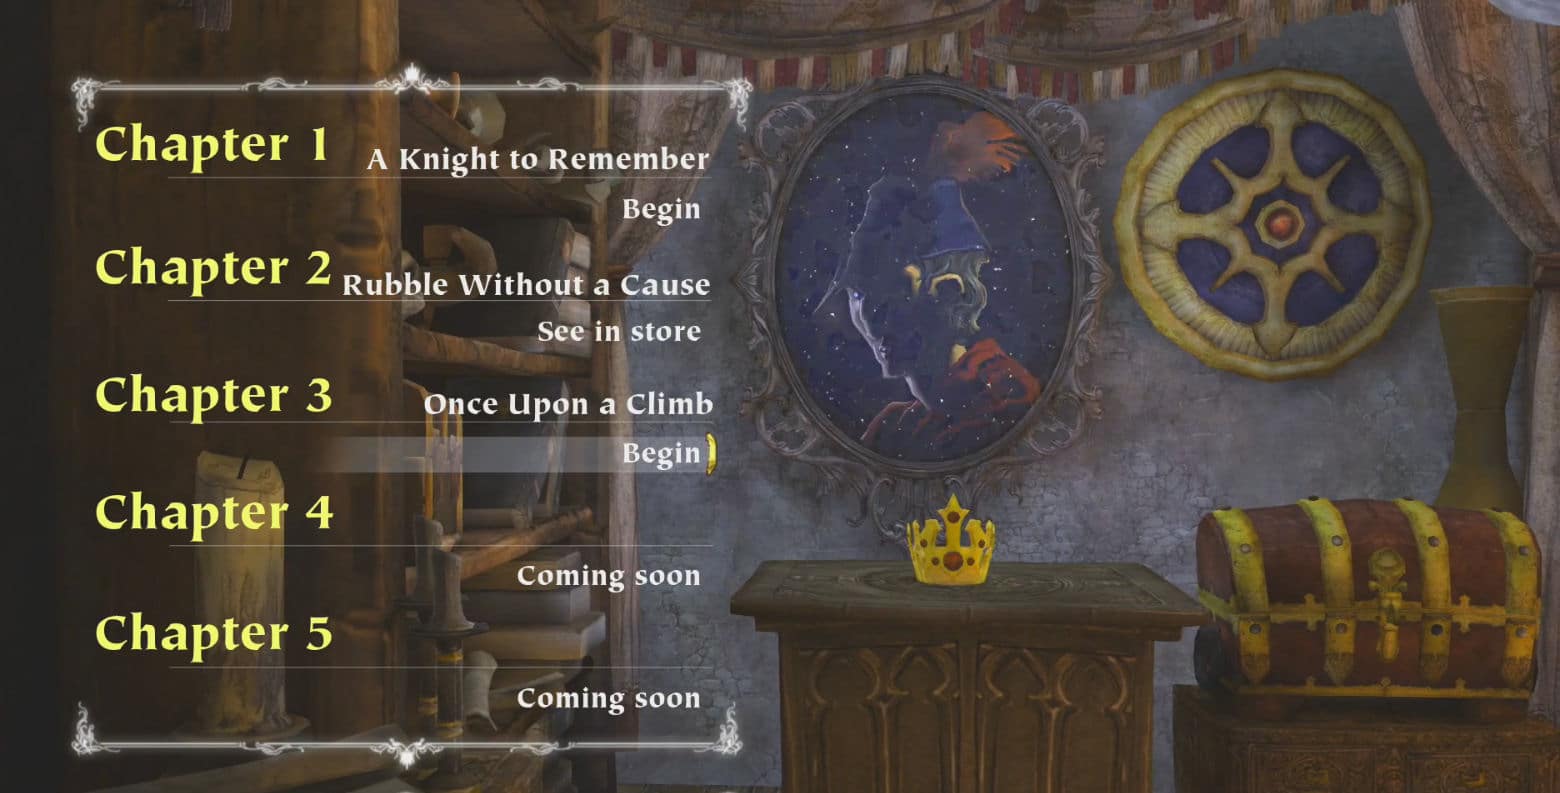 King's Quest 2015: Chapter 4 Release Date